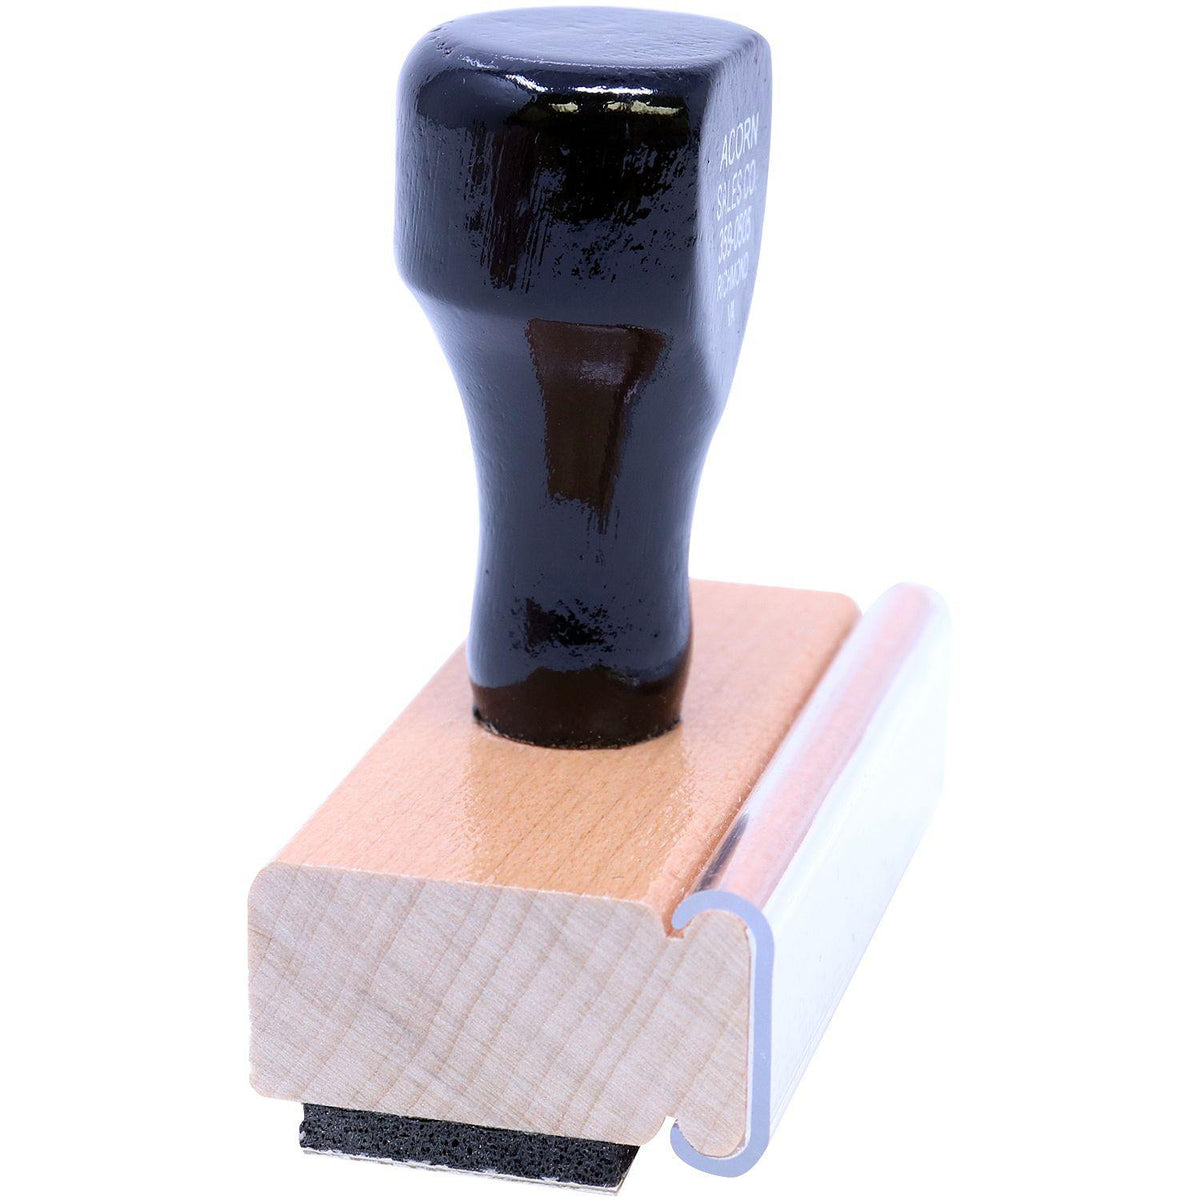 Side View of Large Global Air Parcel Post Rubber Stamp at an Angle